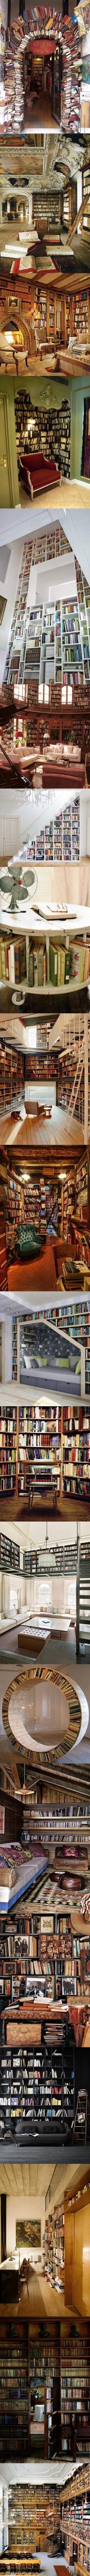 Gorgeous bookshelves and libraries.